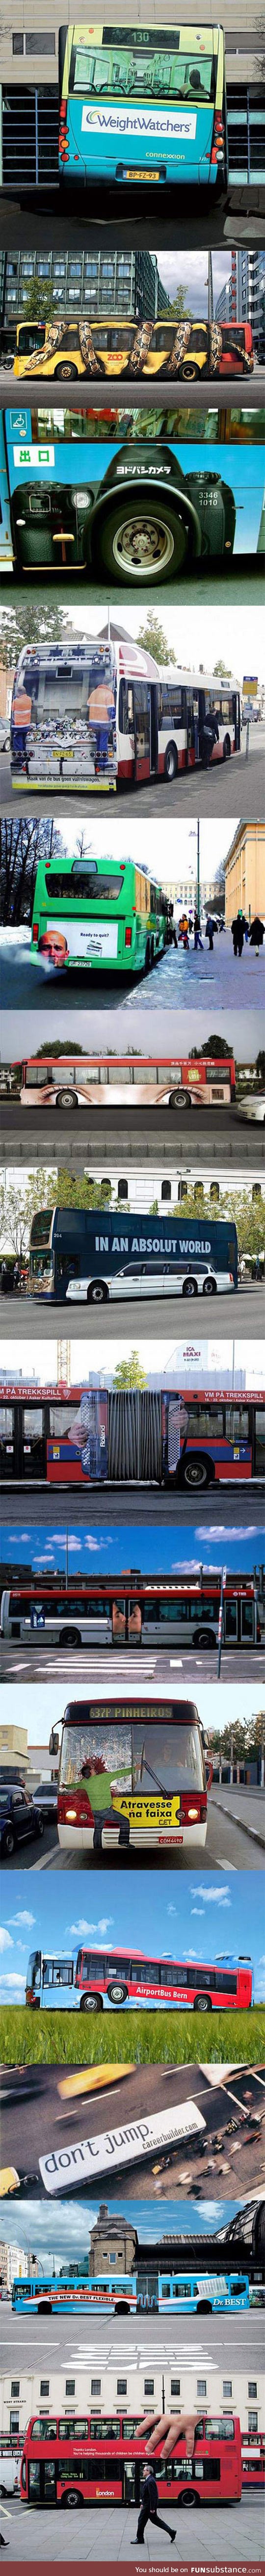 When buses get creative